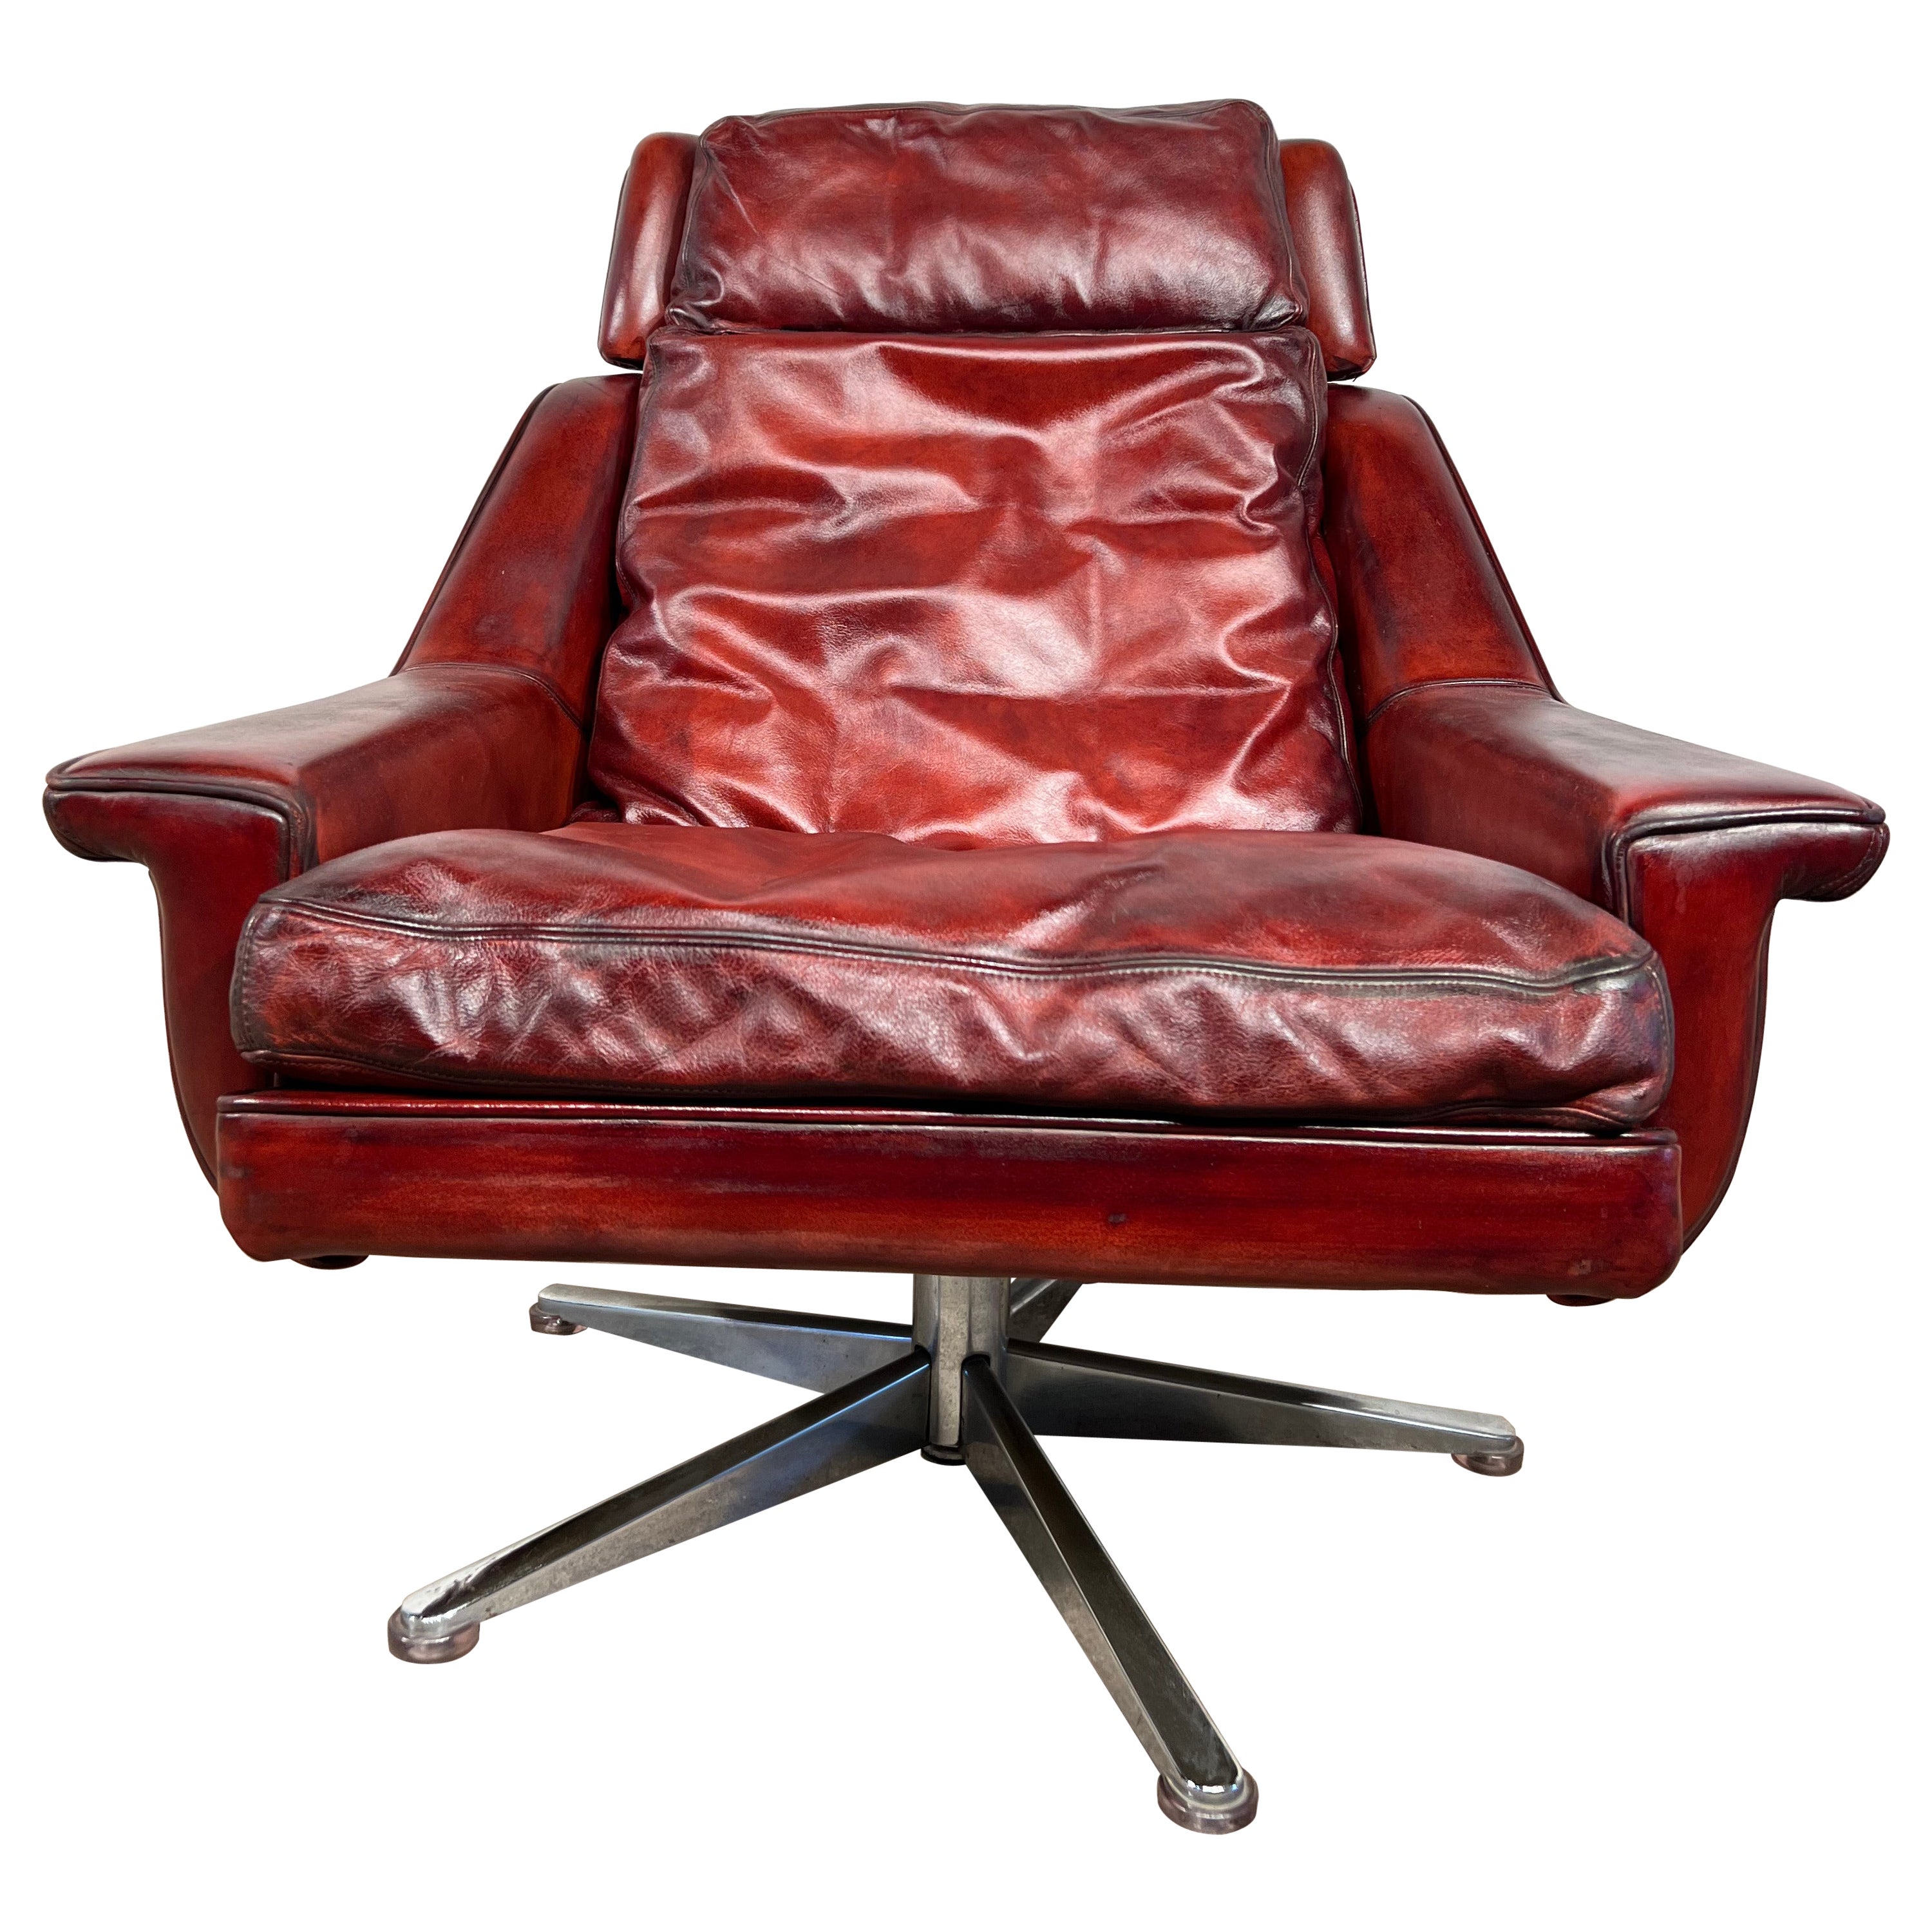 Great Quality Esa Vintage Danish 1970 Swivel ArmChair Patinated Deep Red #595 For Sale